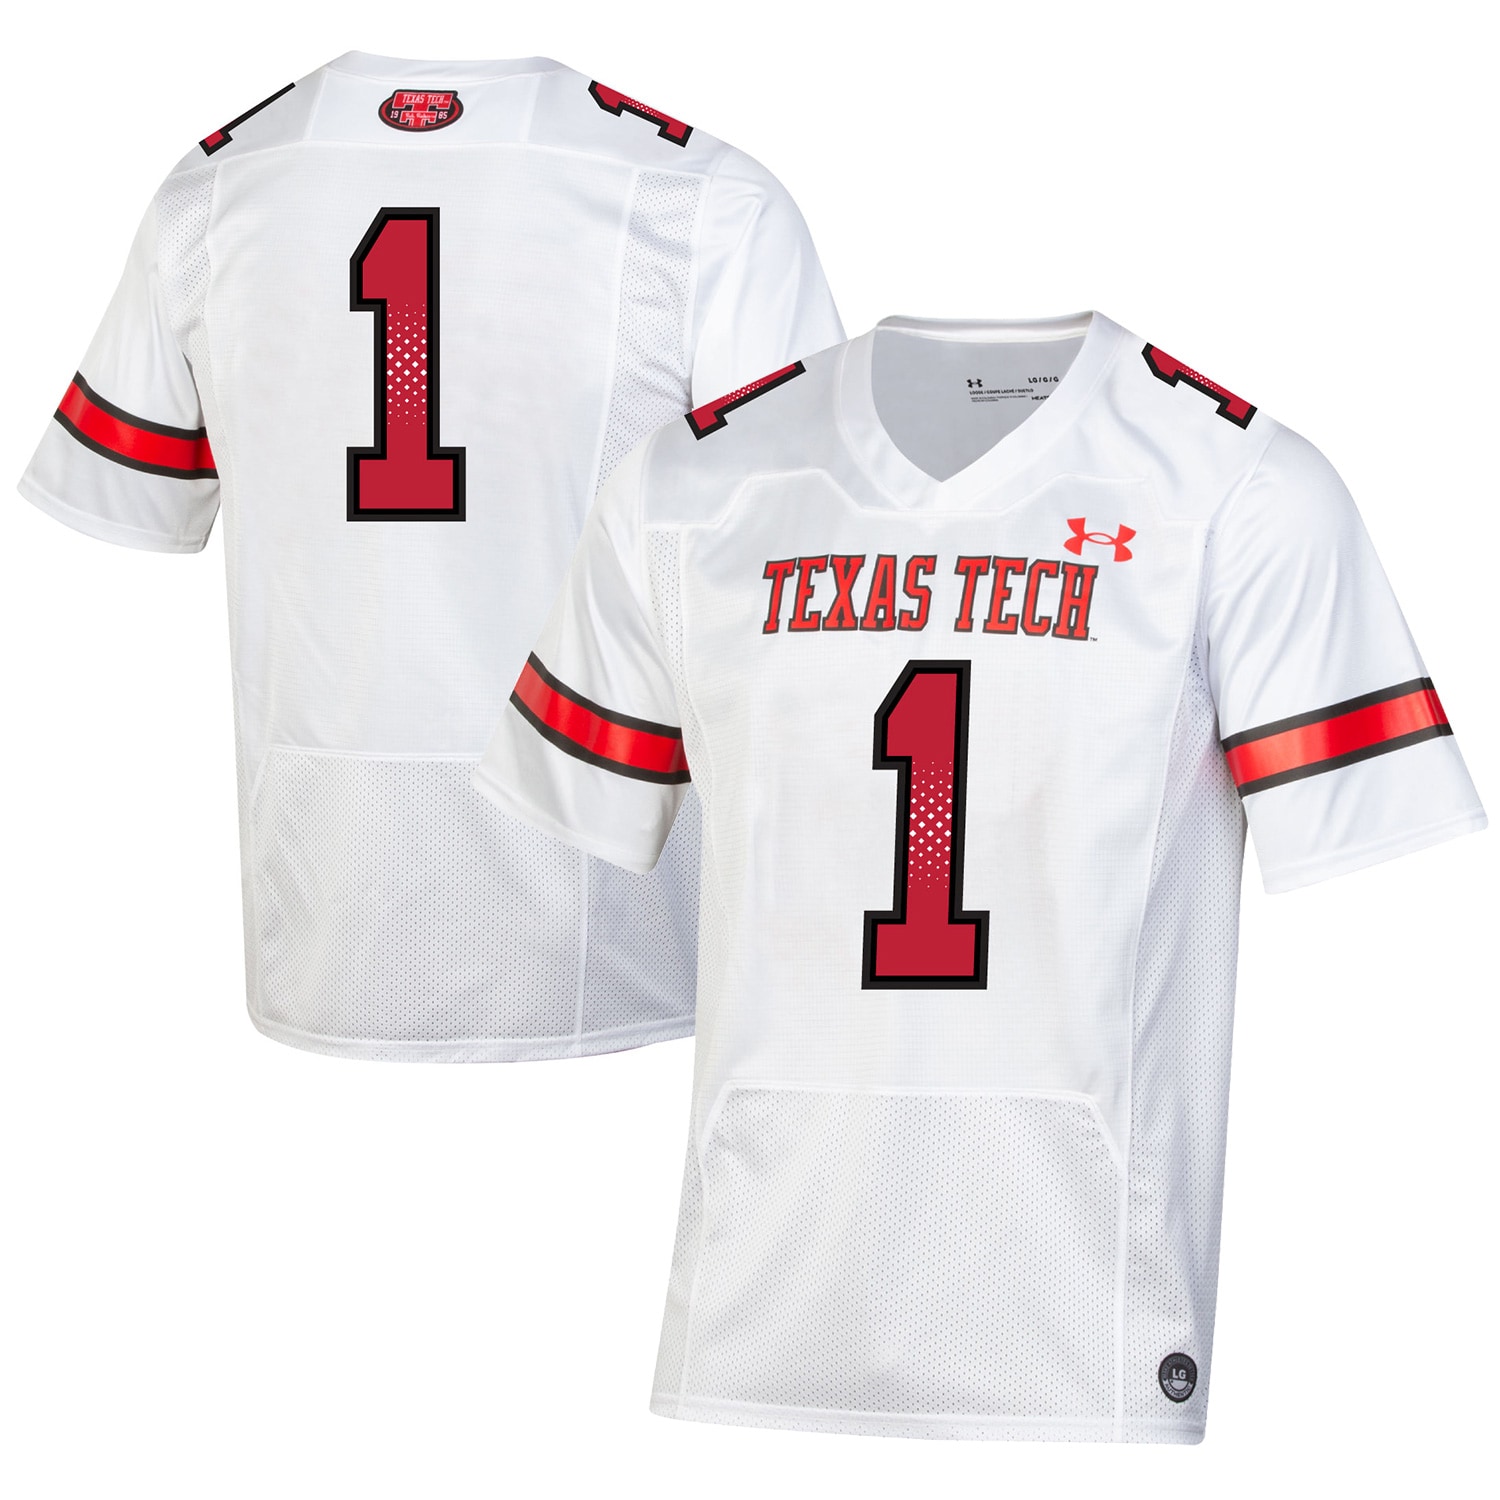 #1 Texas Tech Red Raiders Under Armour Throwback Replica Jersey - White For Youth Women Men